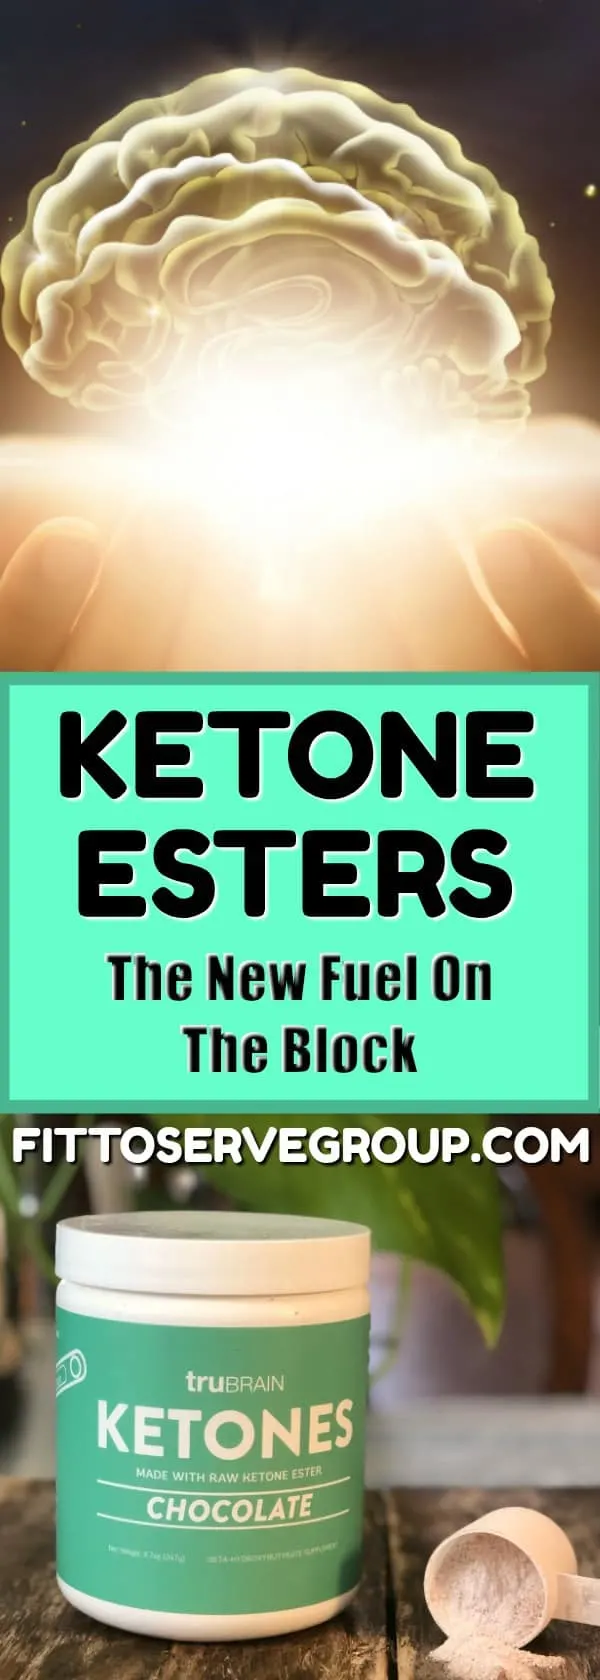 Ketone esters the new fuel on the block 